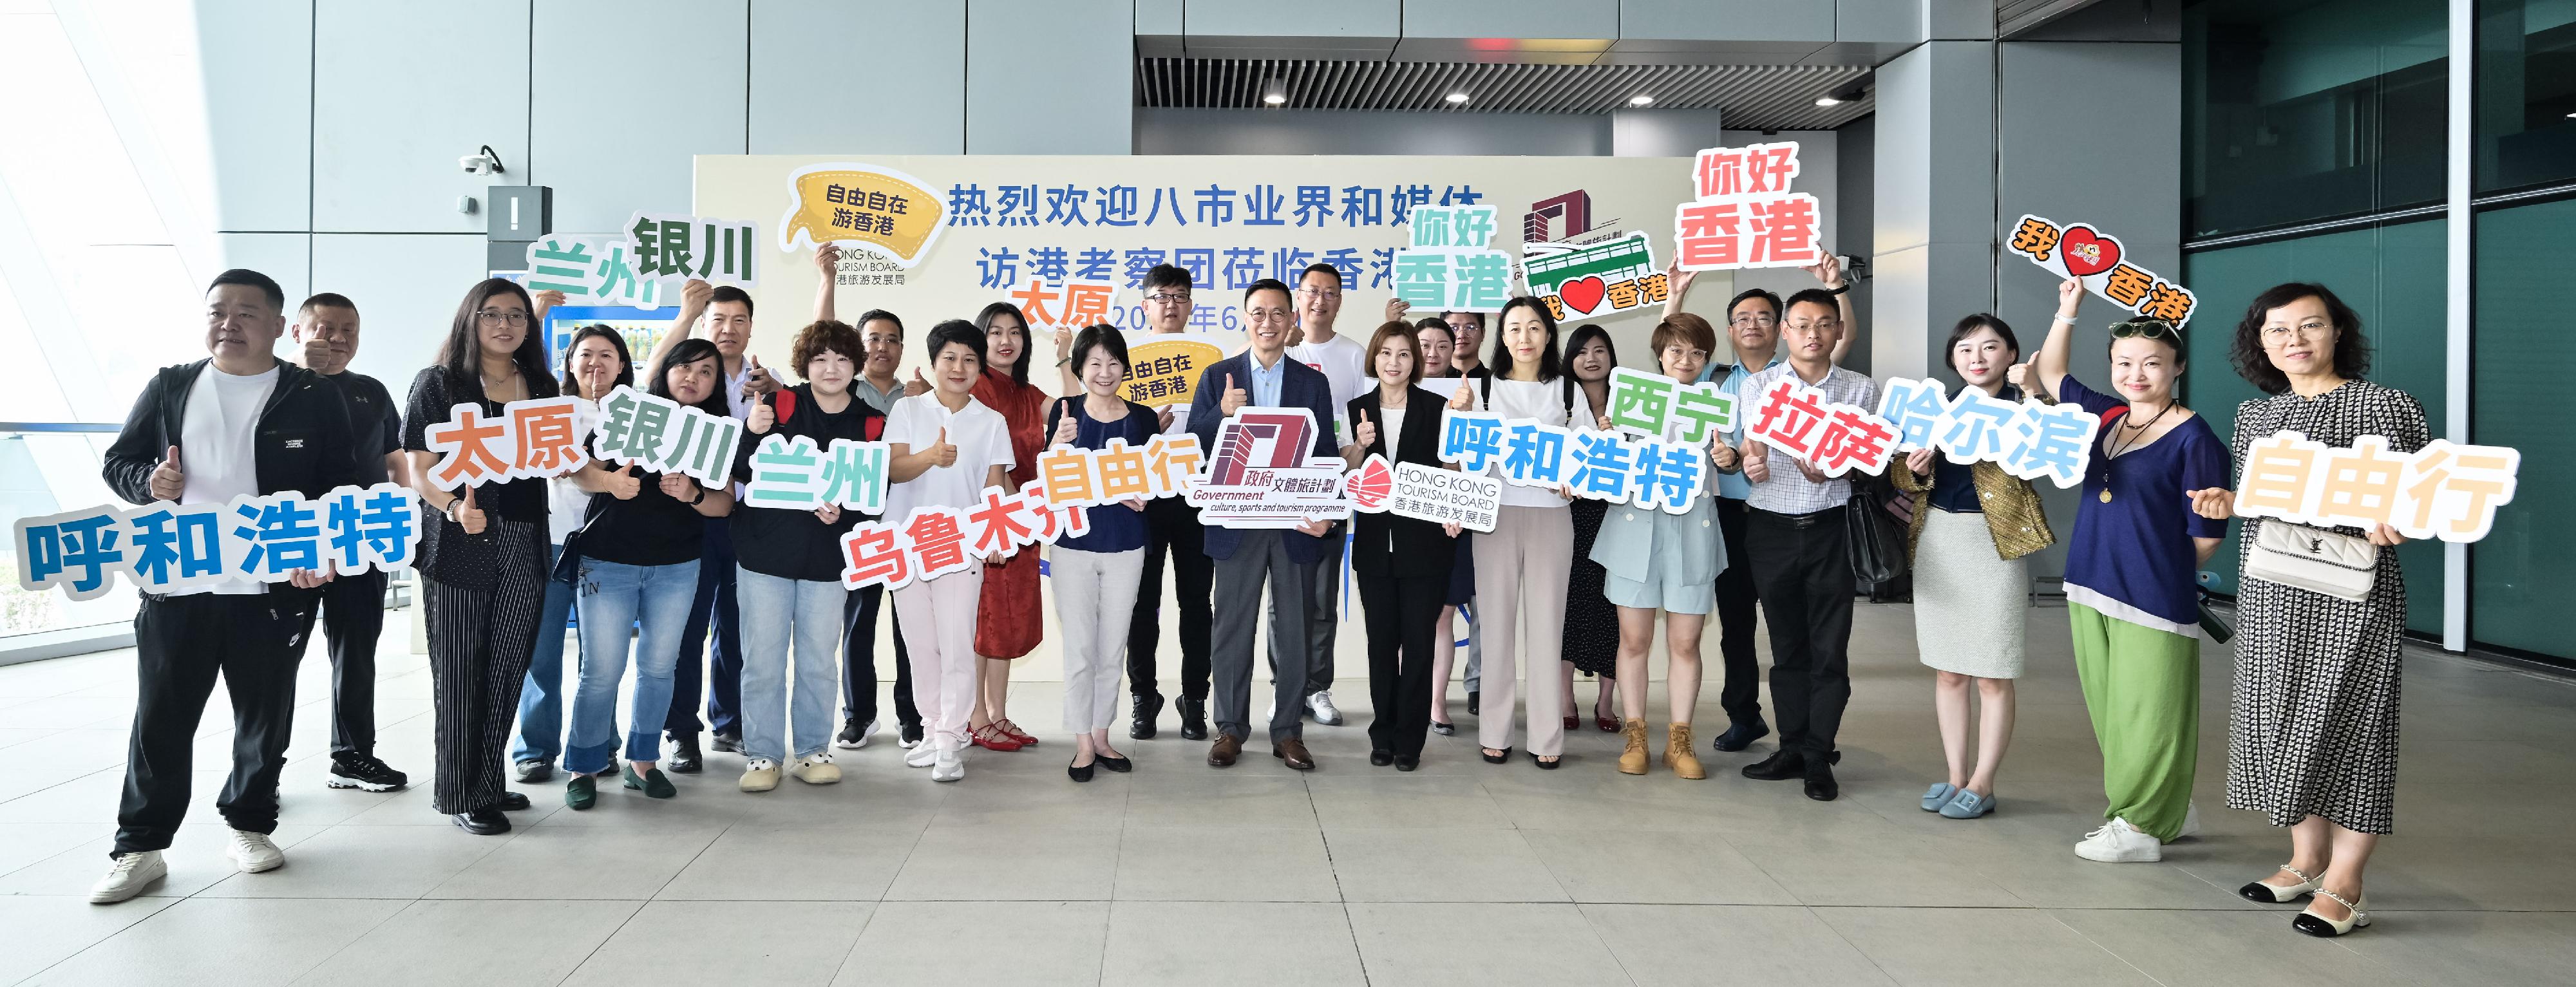 The Secretary for Culture, Sports and Tourism, Mr Kevin Yeung (front row, centre), today (June 2) welcomed representatives of tourism industry and media from eight Mainland cities at the visitor centre of the Hong Kong Tourism Board located at the Heung Yuen Wai Boundary Control Point. The Commissioner for Tourism, Ms Vivian Sum (front row, sixth left), also joined the visit.